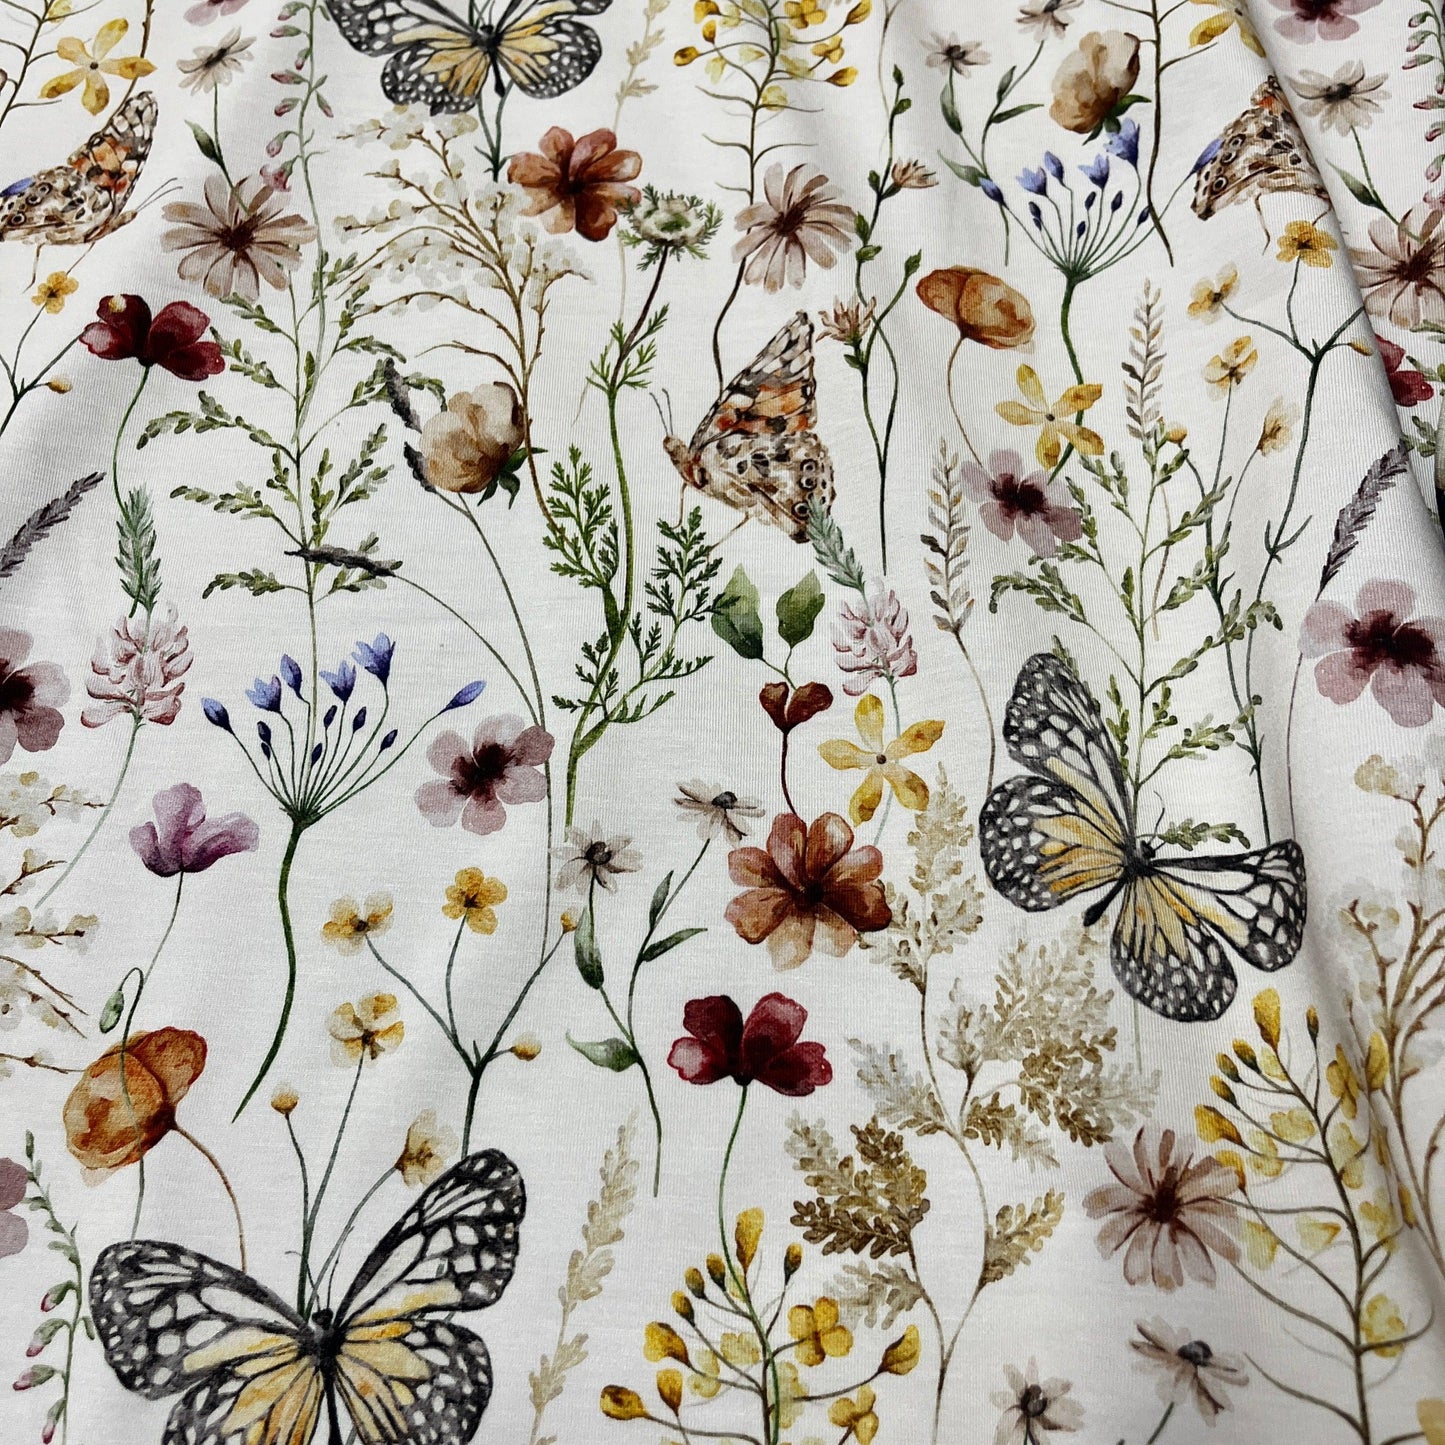 Butterfly Field on Bamboo/Spandex Jersey Fabric - Nature's Fabrics